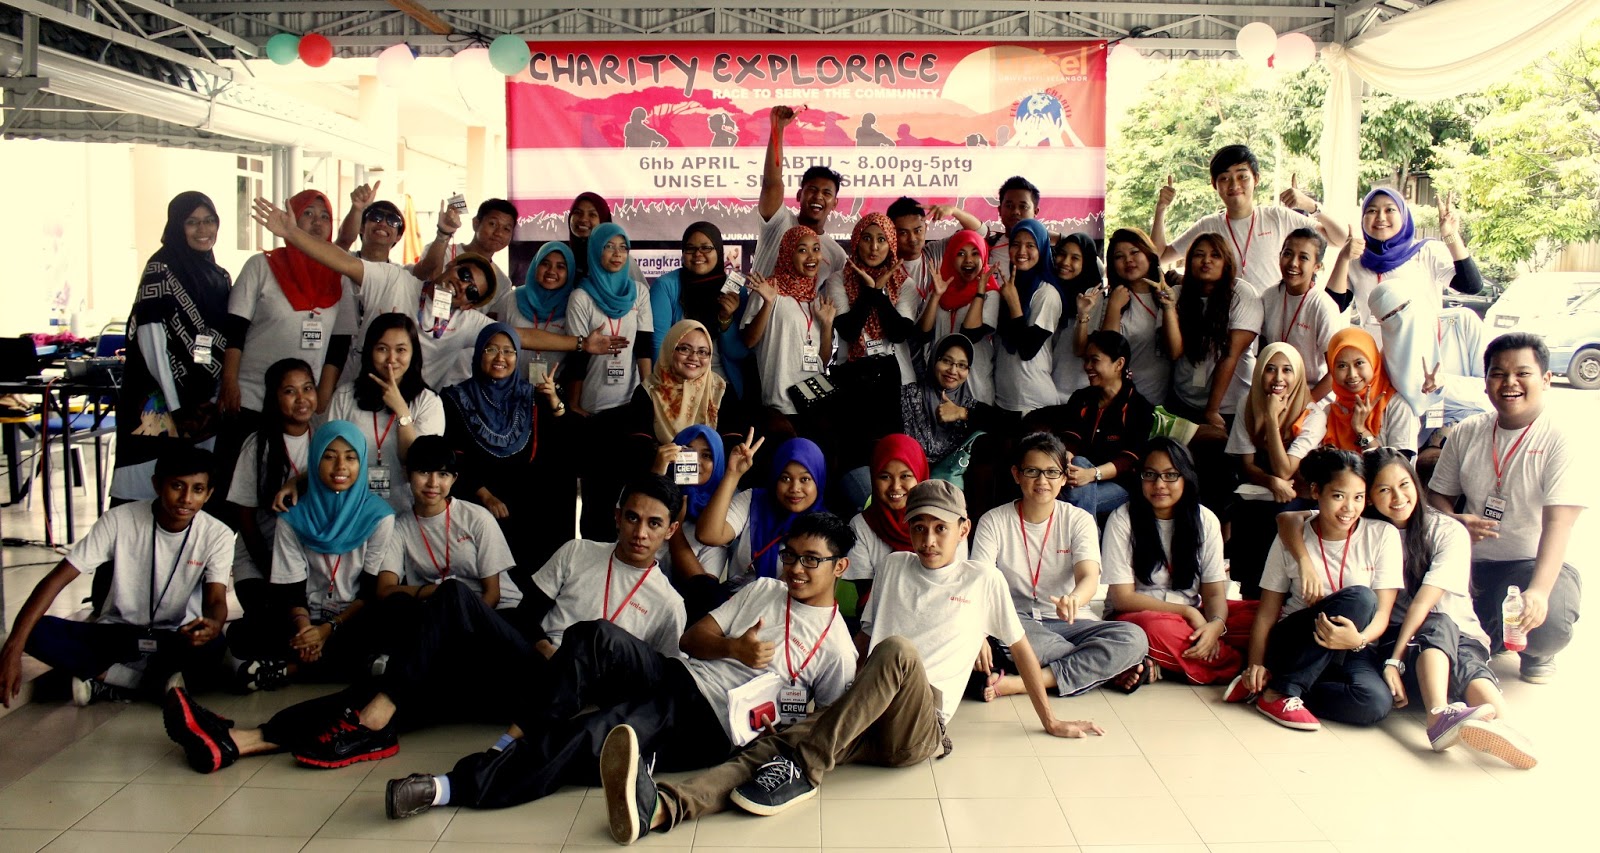 From Shah Alam with News: Charity Explorace by Unisel Student